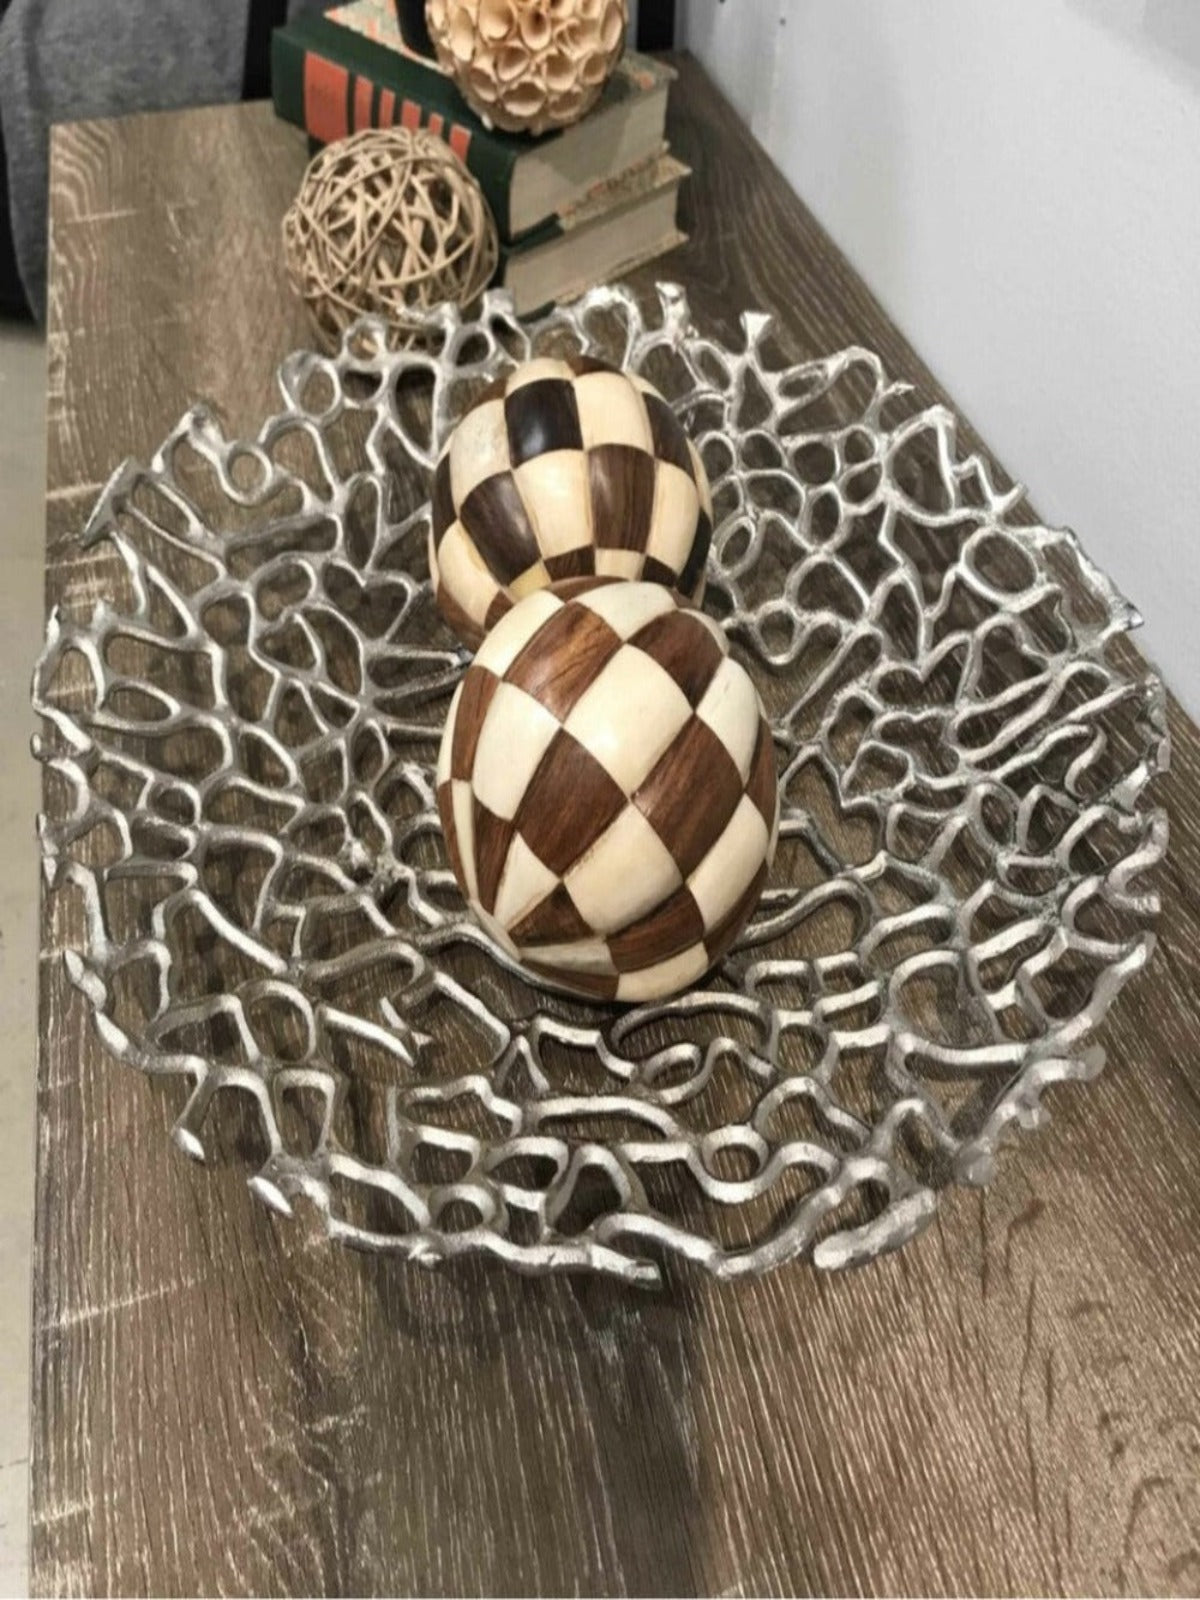 The Corallo Round Coral Plate is an enticing Accessory. Made of Cast Aluminum in an Open Connected Coral Design. Finished in Matte Silver this Plate is a great addition to Modern and Transitional Decor.